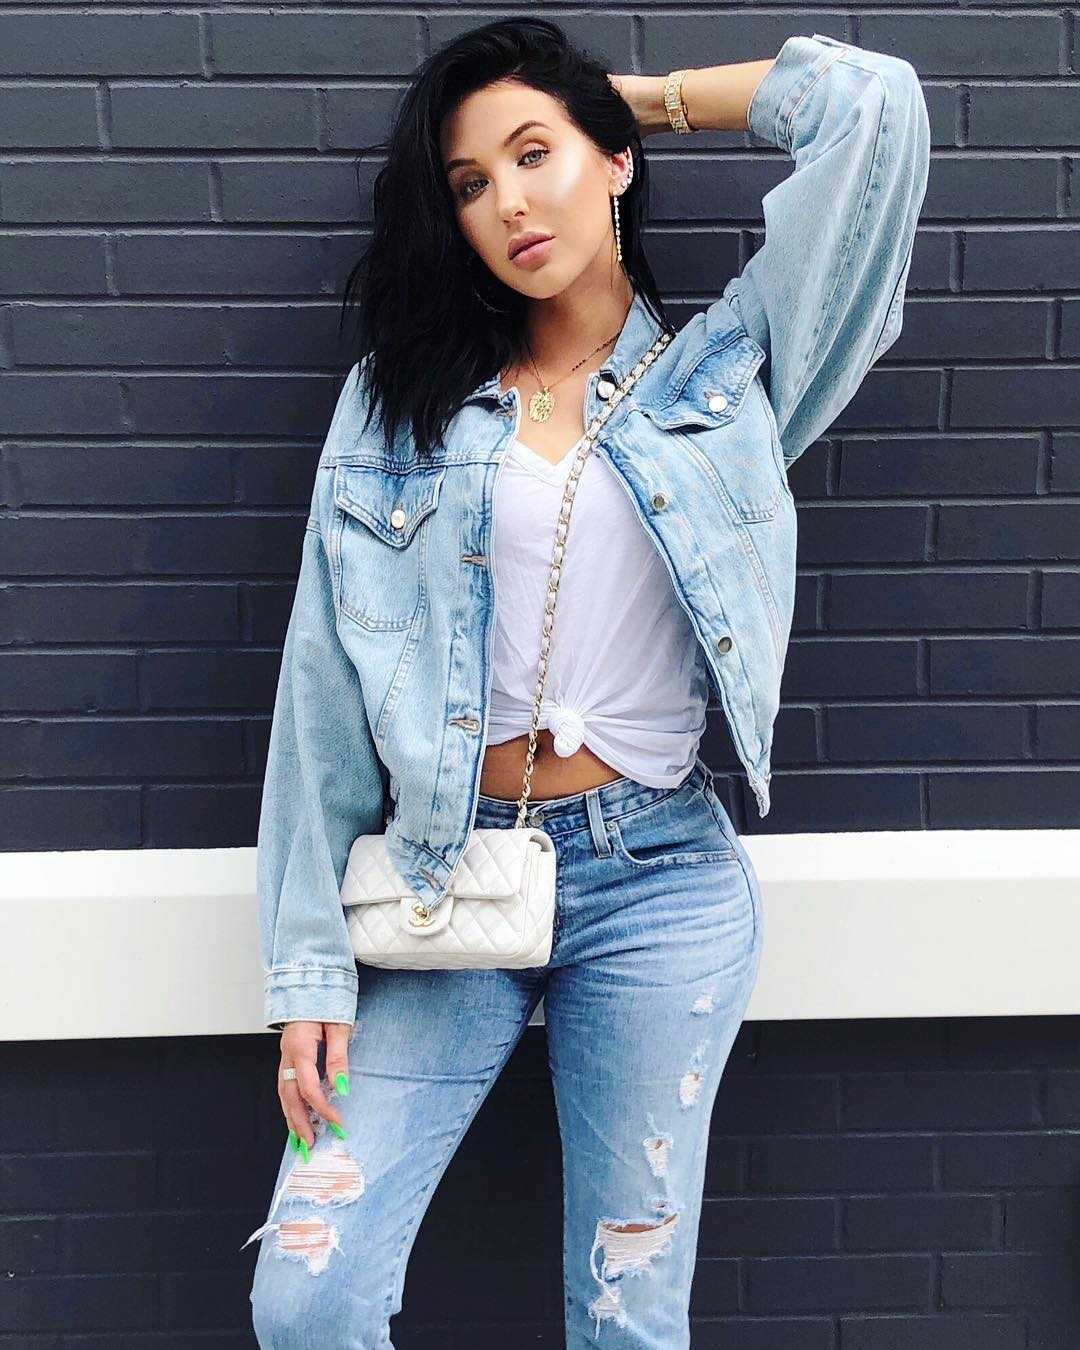 51 Sexy Jaclyn Hill Boobs Pictures Will Induce Passionate Feelings for Her 183